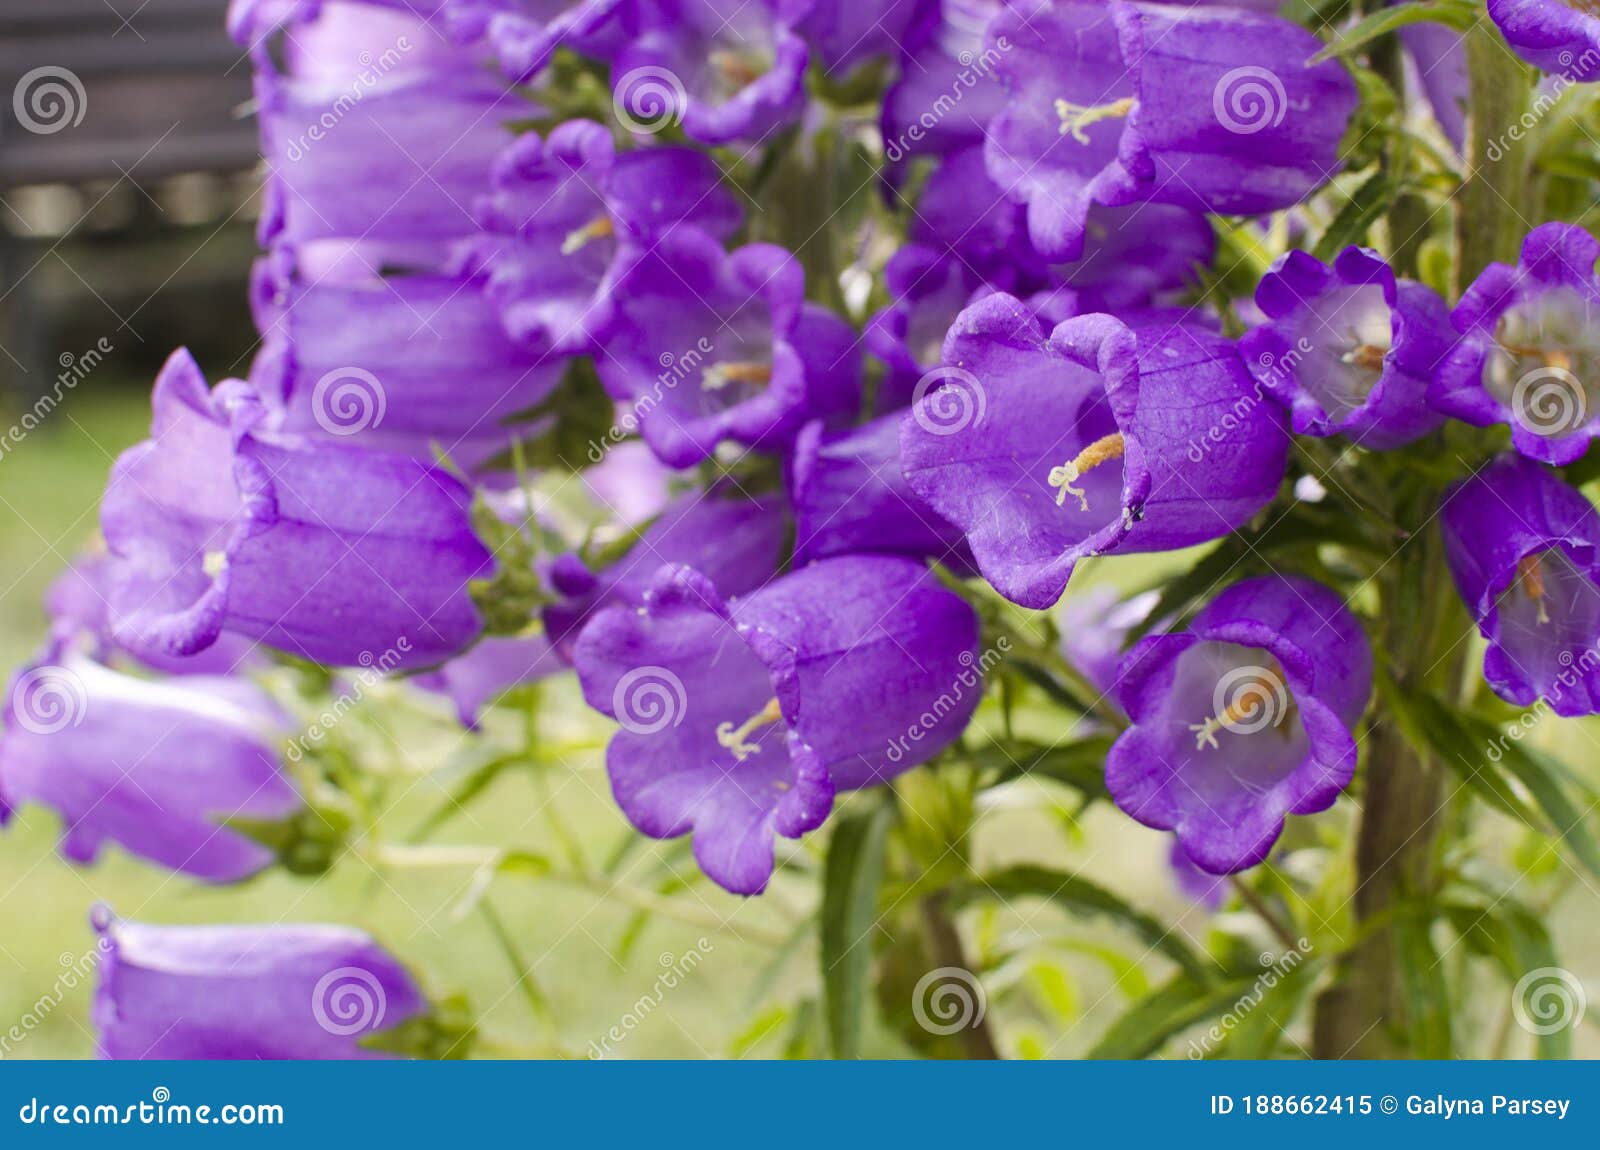 Campanula The Name Of The Genus Comes From The Latin Word Meaning Stock Image Image Of Blossom Color 188662415